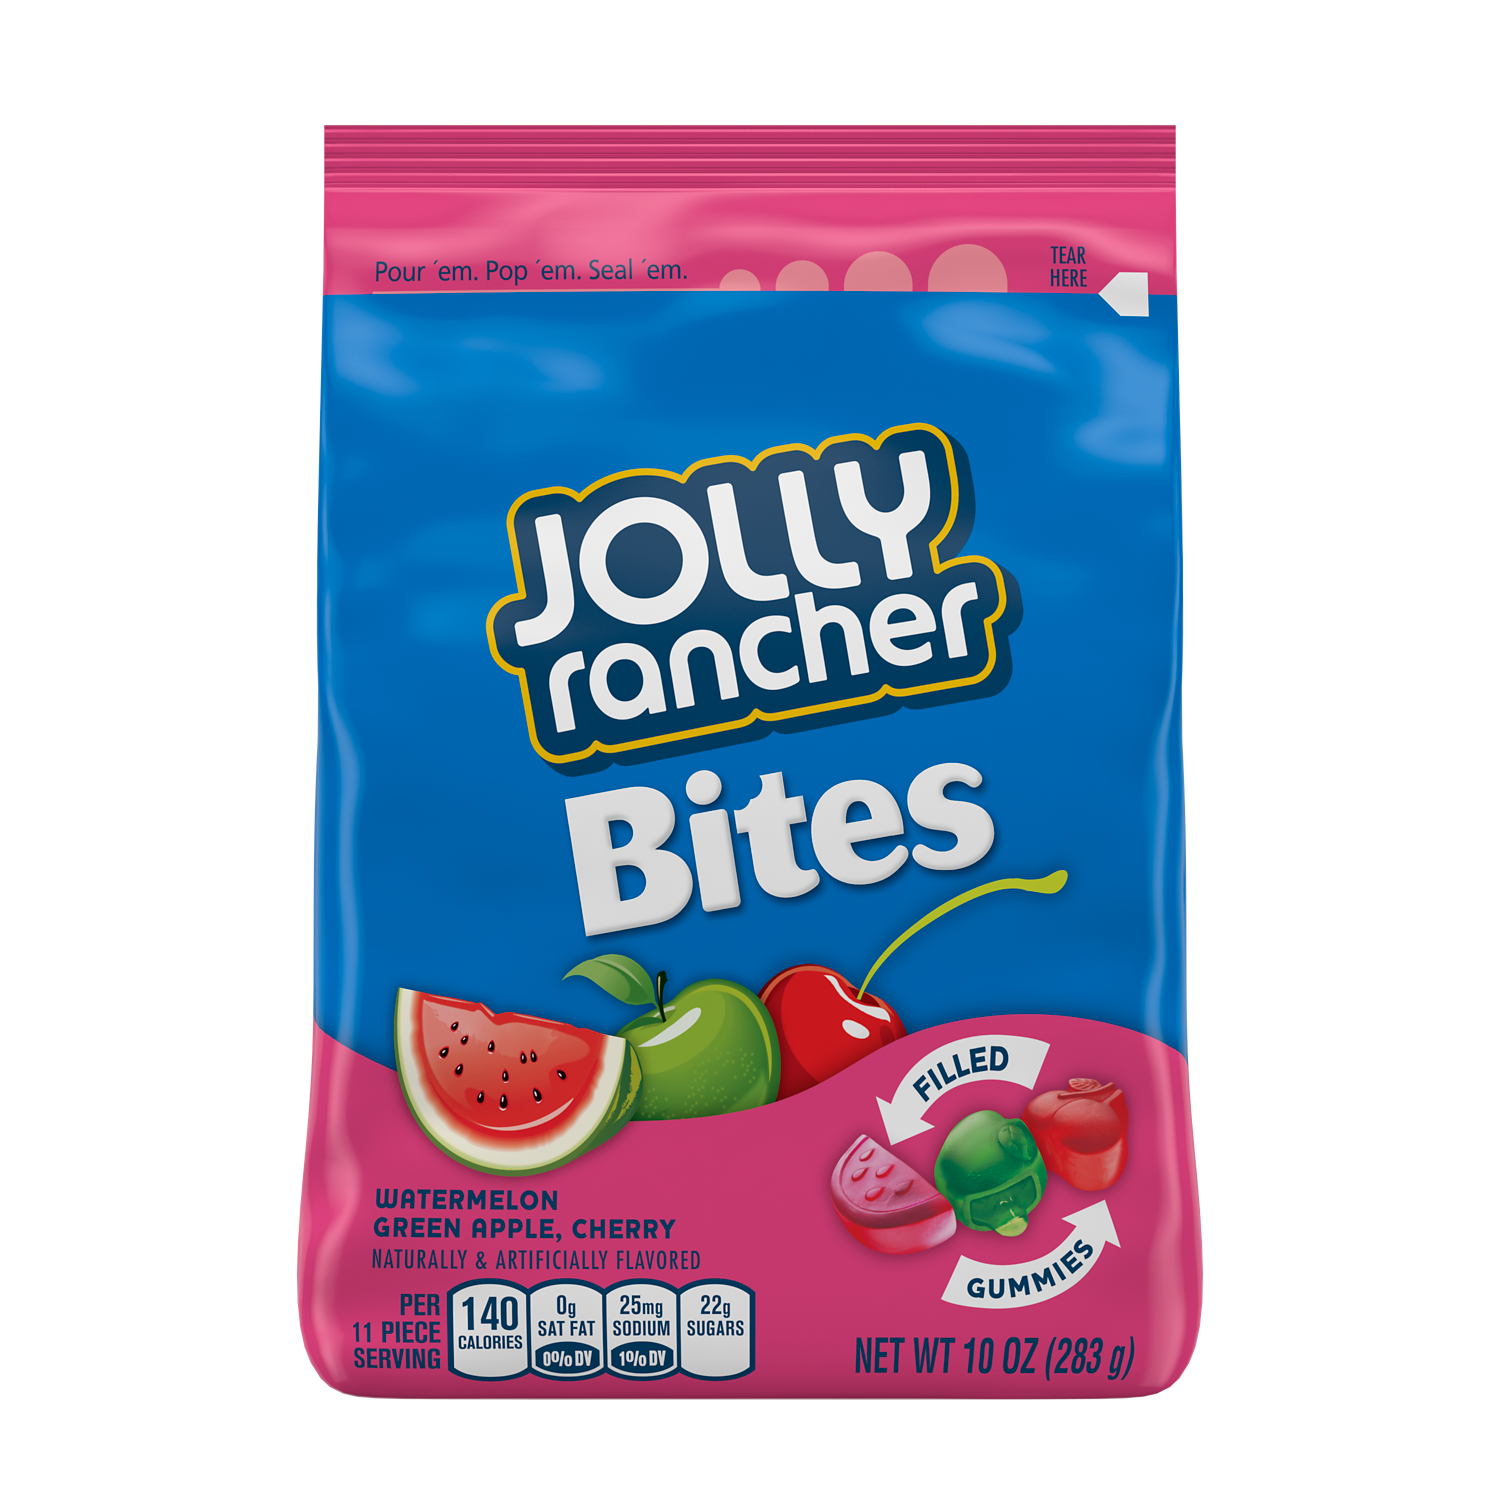 JOLLY RANCHER Bites Watermelon, Green Apple and Cherry Filled Gummies, 10 oz bag - Front of Package